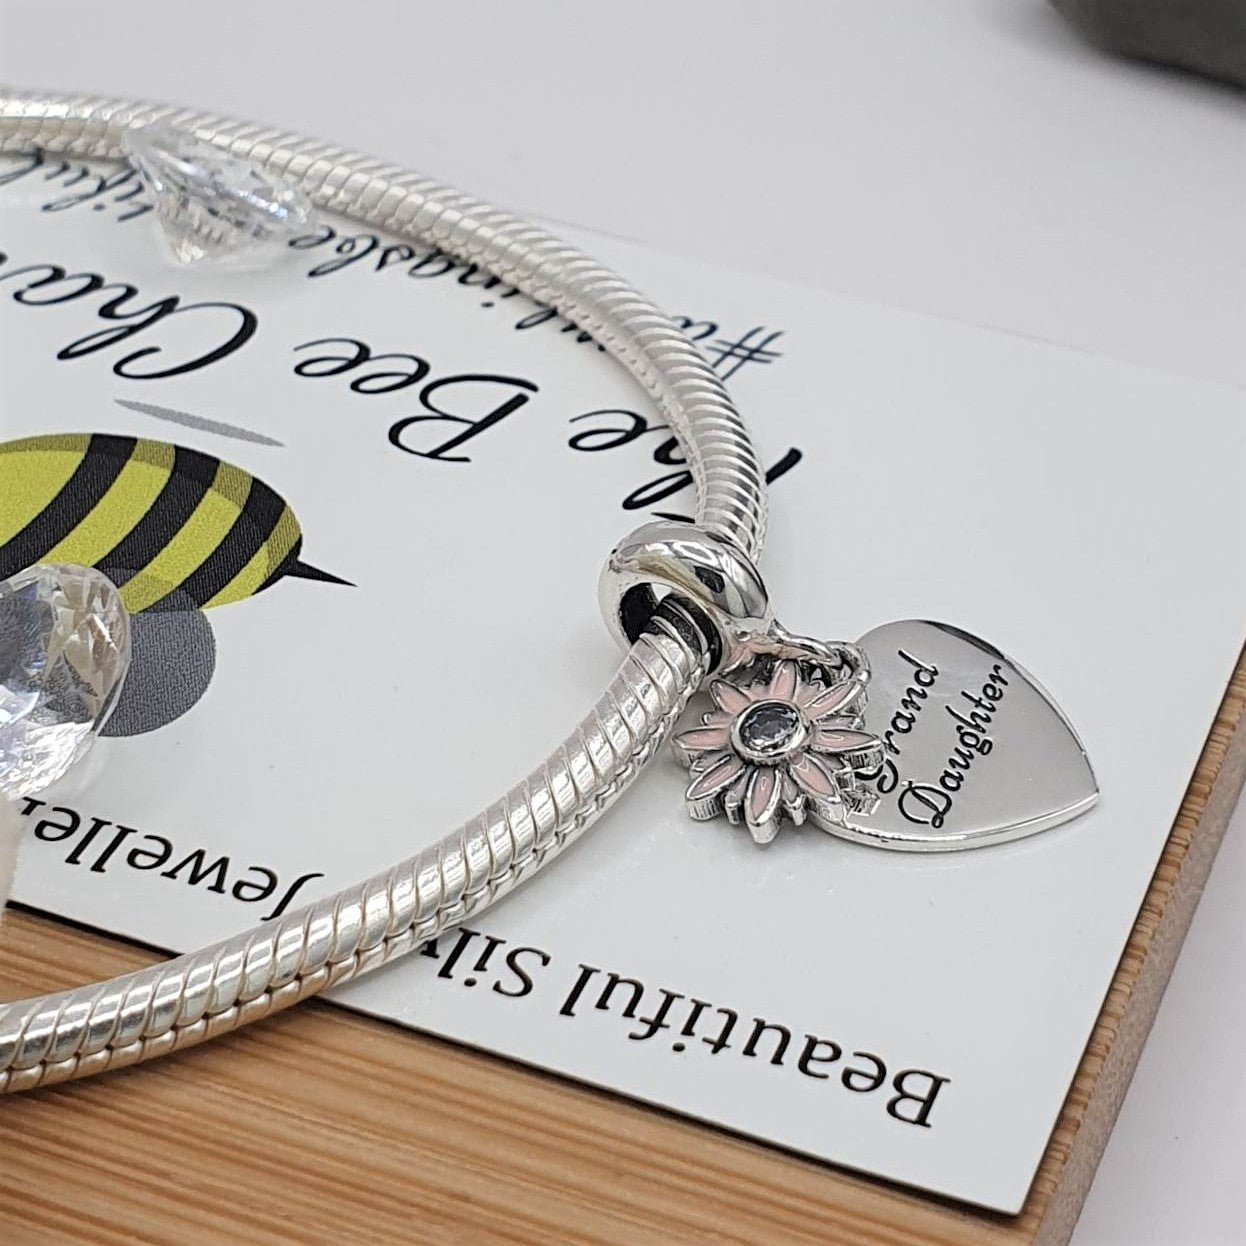 Grand Daughter Charm - The Bee Charm